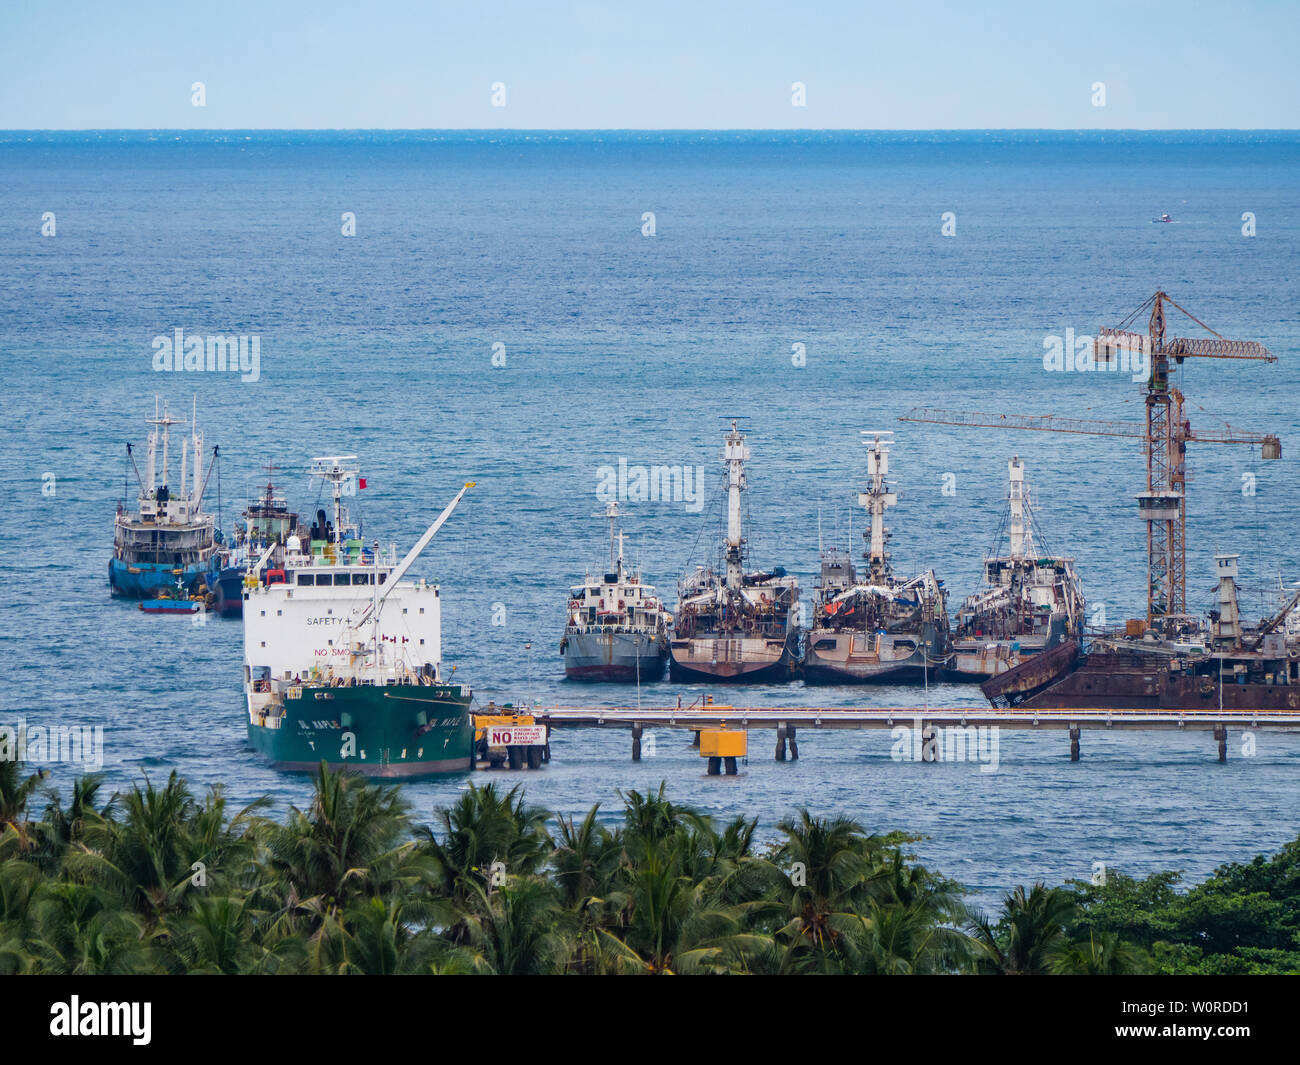 General Santos City, The Philippines - May 22, 2019: Ocean going tuna vessels with the characteristic watchtowers at a jetty in General Santos City, t Stock Photo